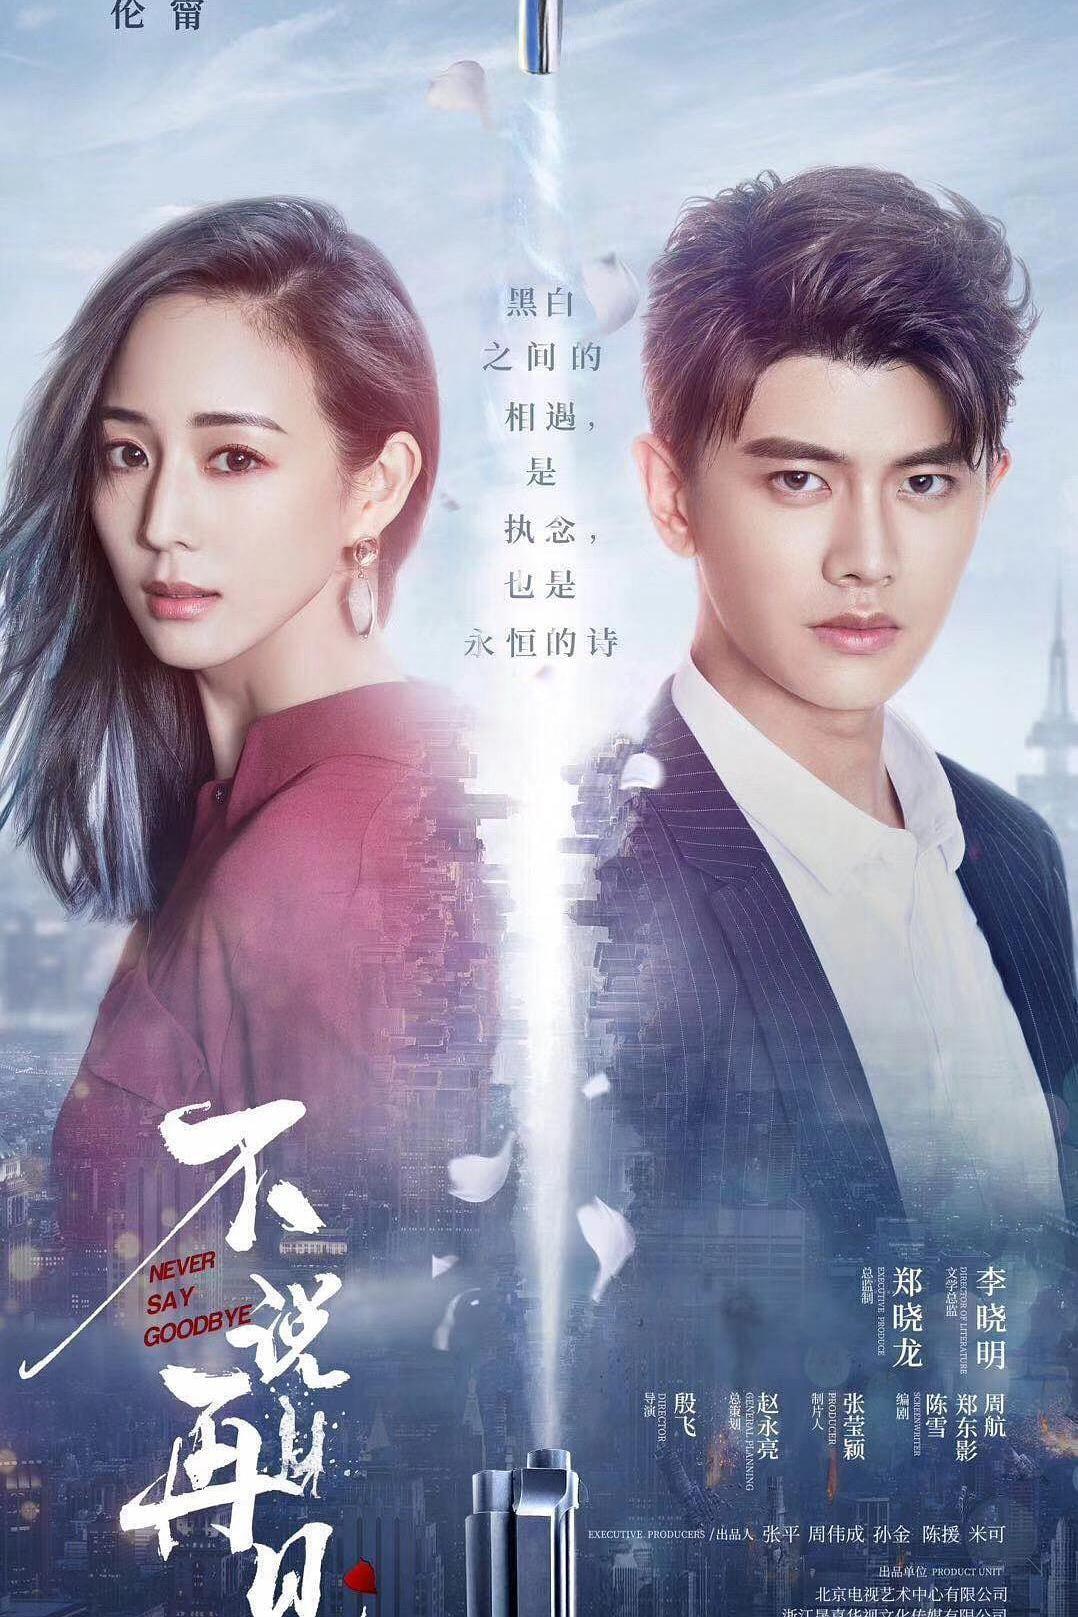 TV ratings for Never Say Goodbye (不说再见) in Malaysia. iqiyi TV series